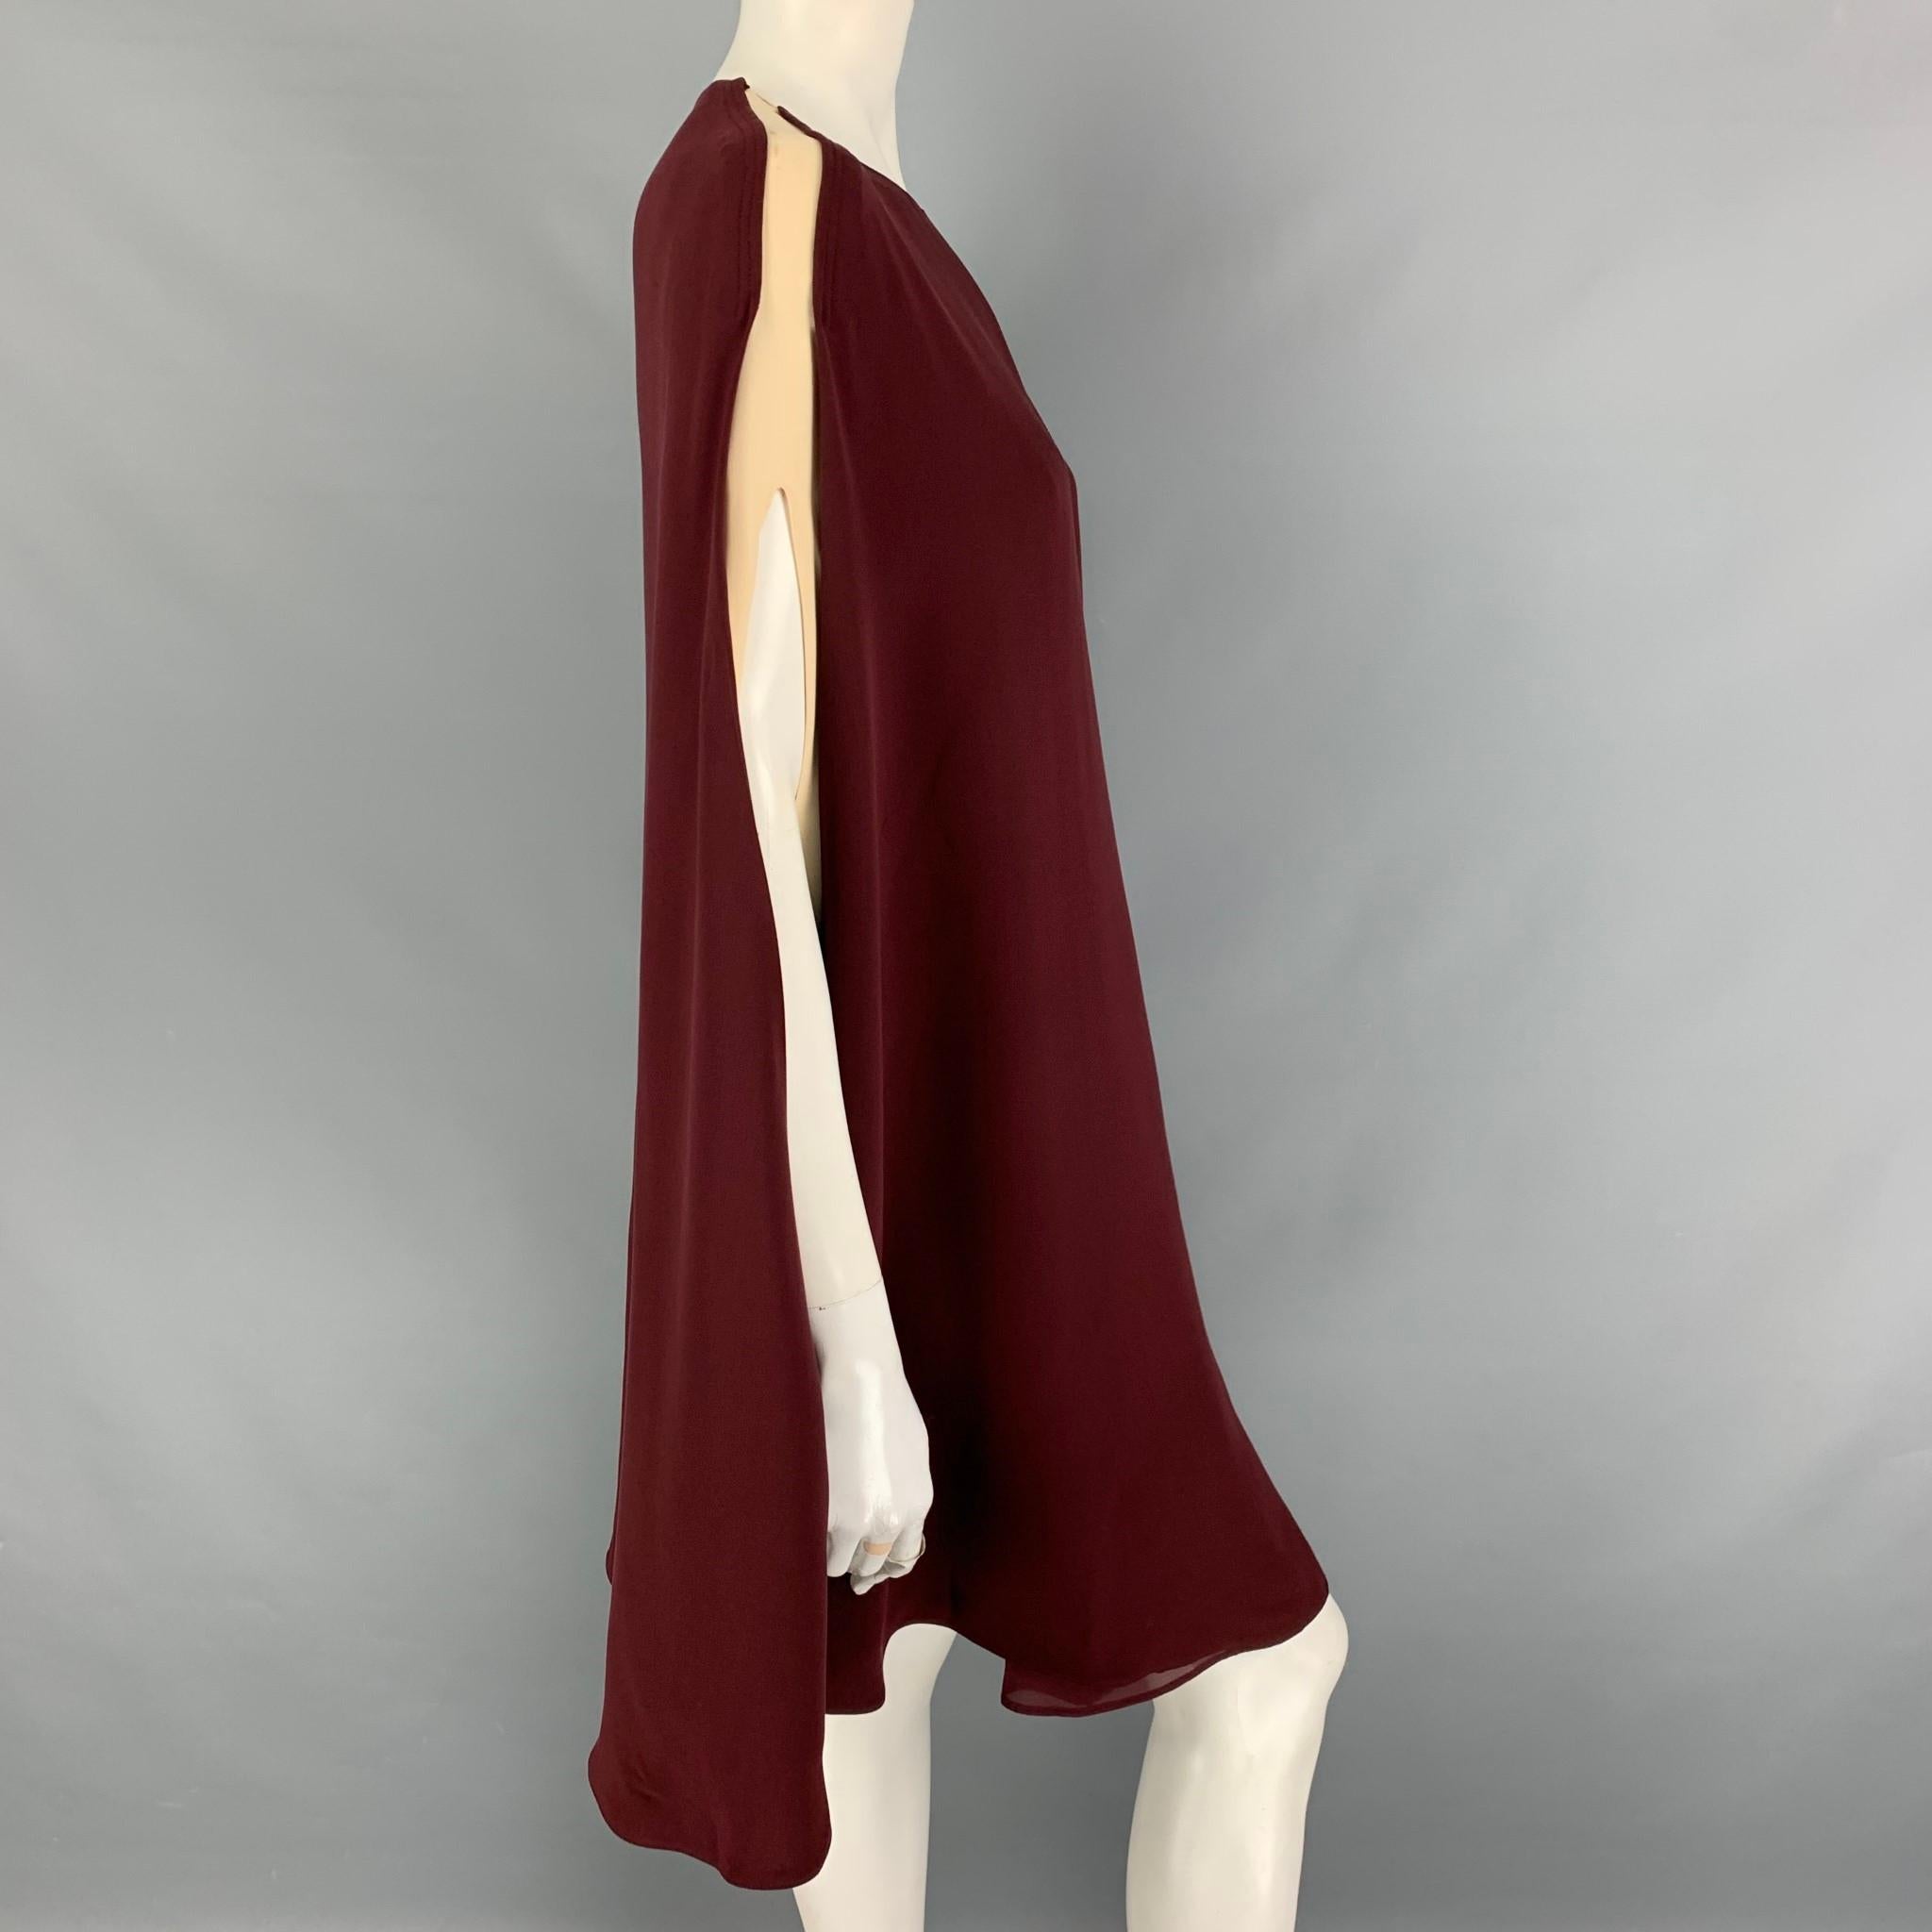 VALENTINO 'Light Cady' dress comes in a burgundy & cream two toned silk featuring a cape style, contrasting bands at the sides, and a back single button closure. Made in Italy. 

Very Good Pre-Owned Condition. Light marks at shoulder.
Marked: